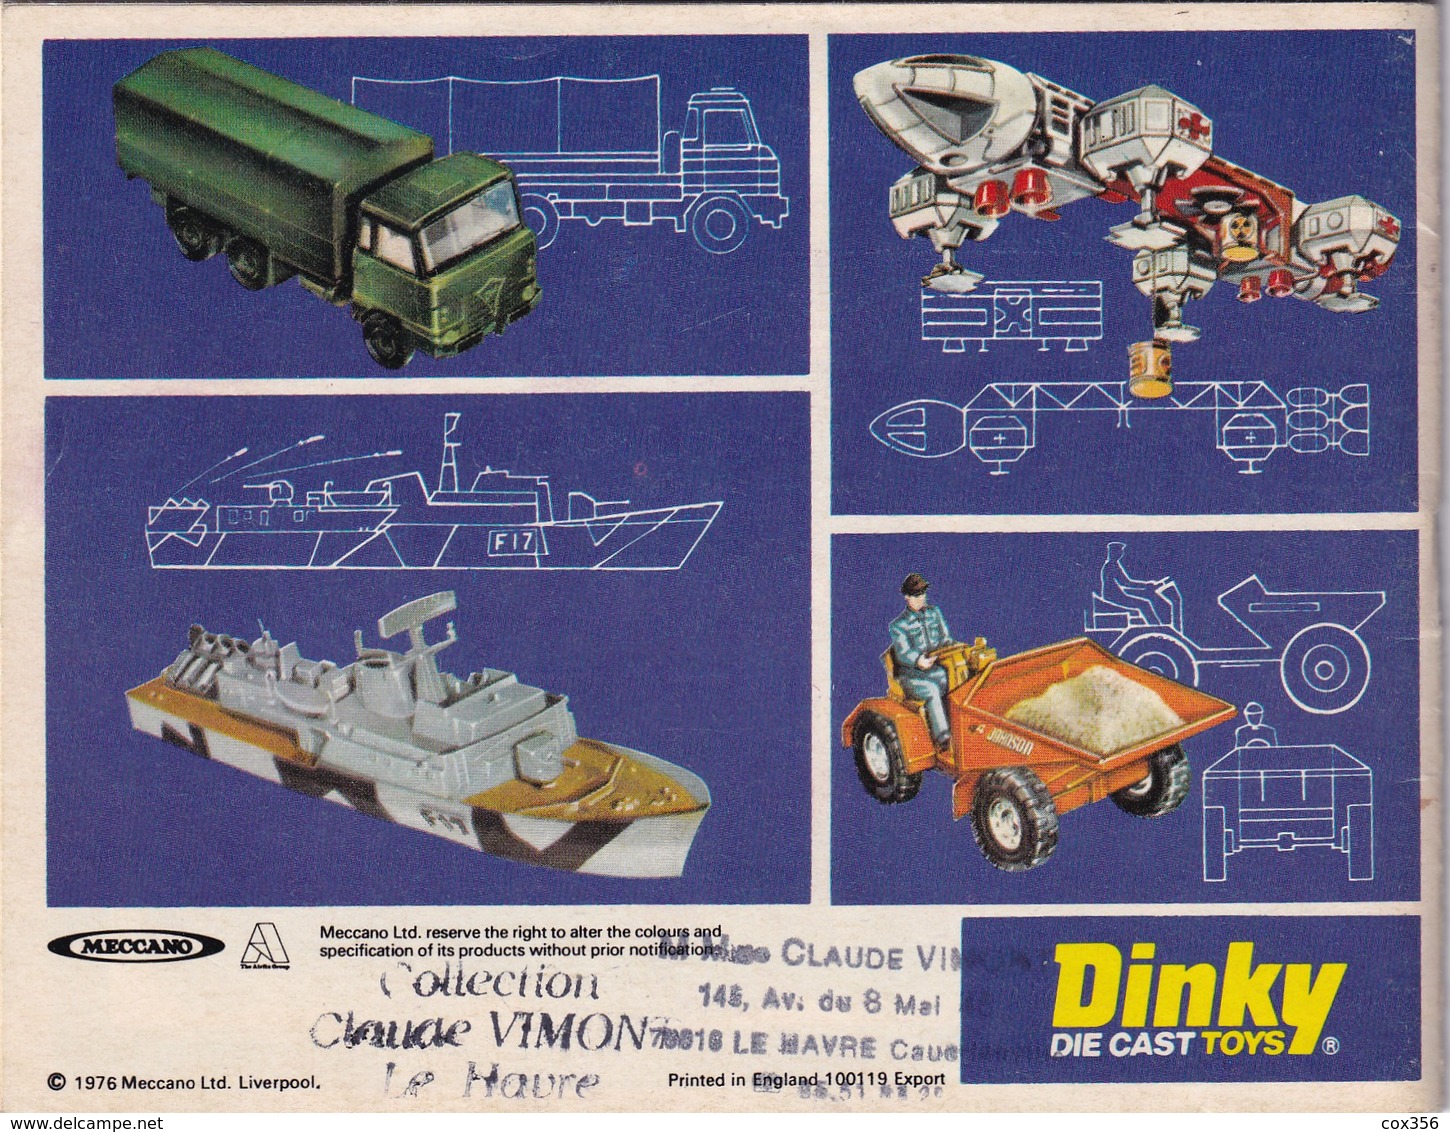 DINKY TOYS CATALOGUE DINKY DIE CAST TOYS N 12